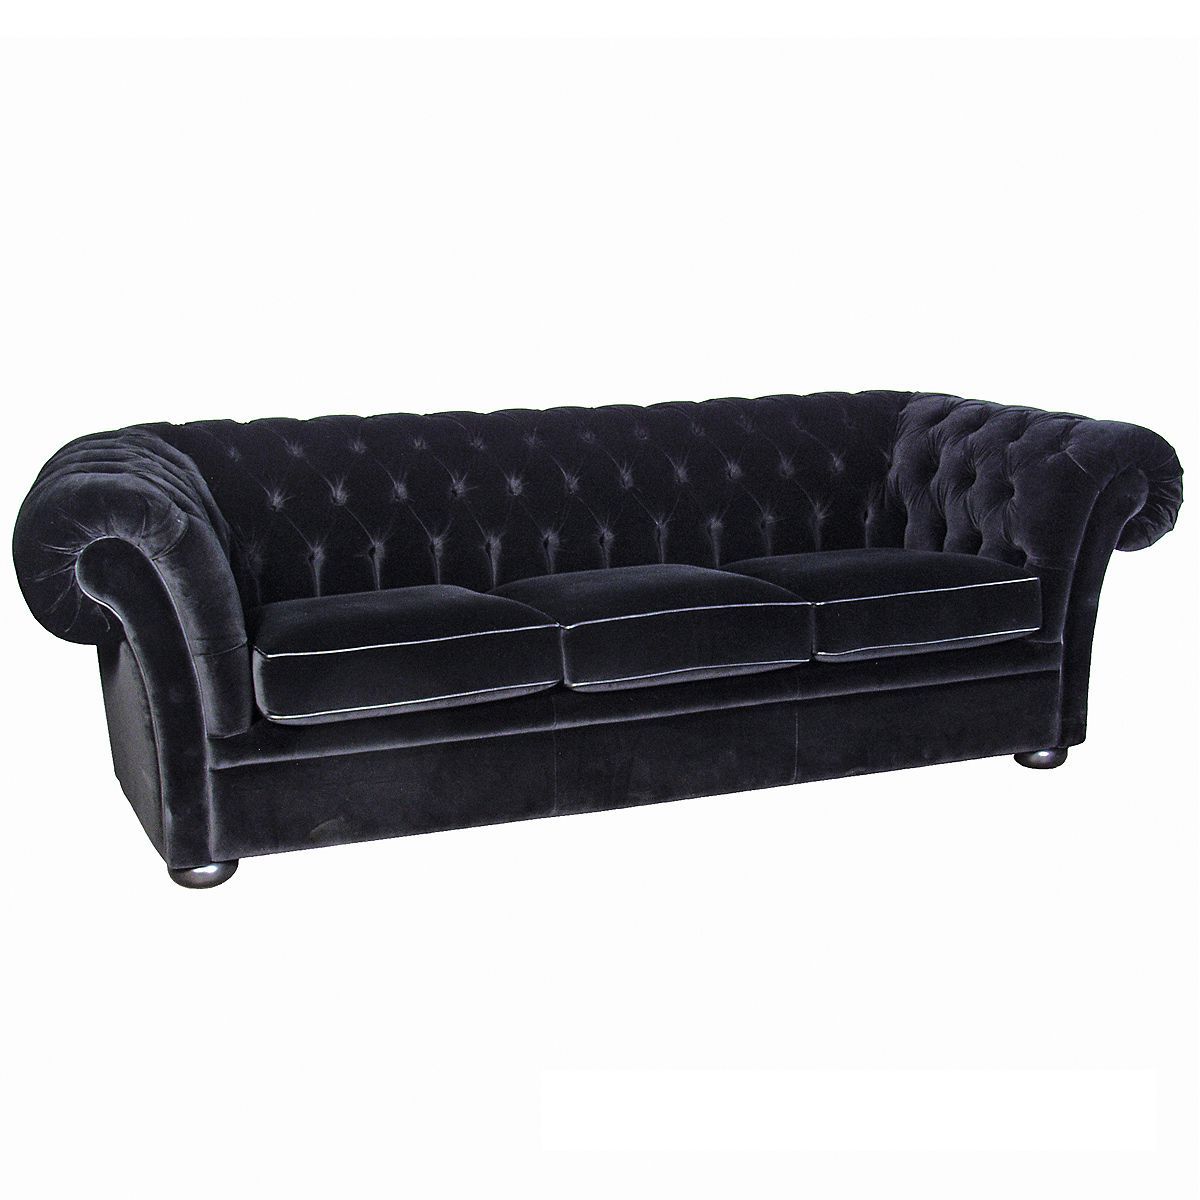 Most Recent 4pc French Seamed Sectional Sofas Velvet Black For 2 Seater: W190 X D90 X H75cm 3 Seater: W245 X D90 X H75cm (Photo 5 of 25)